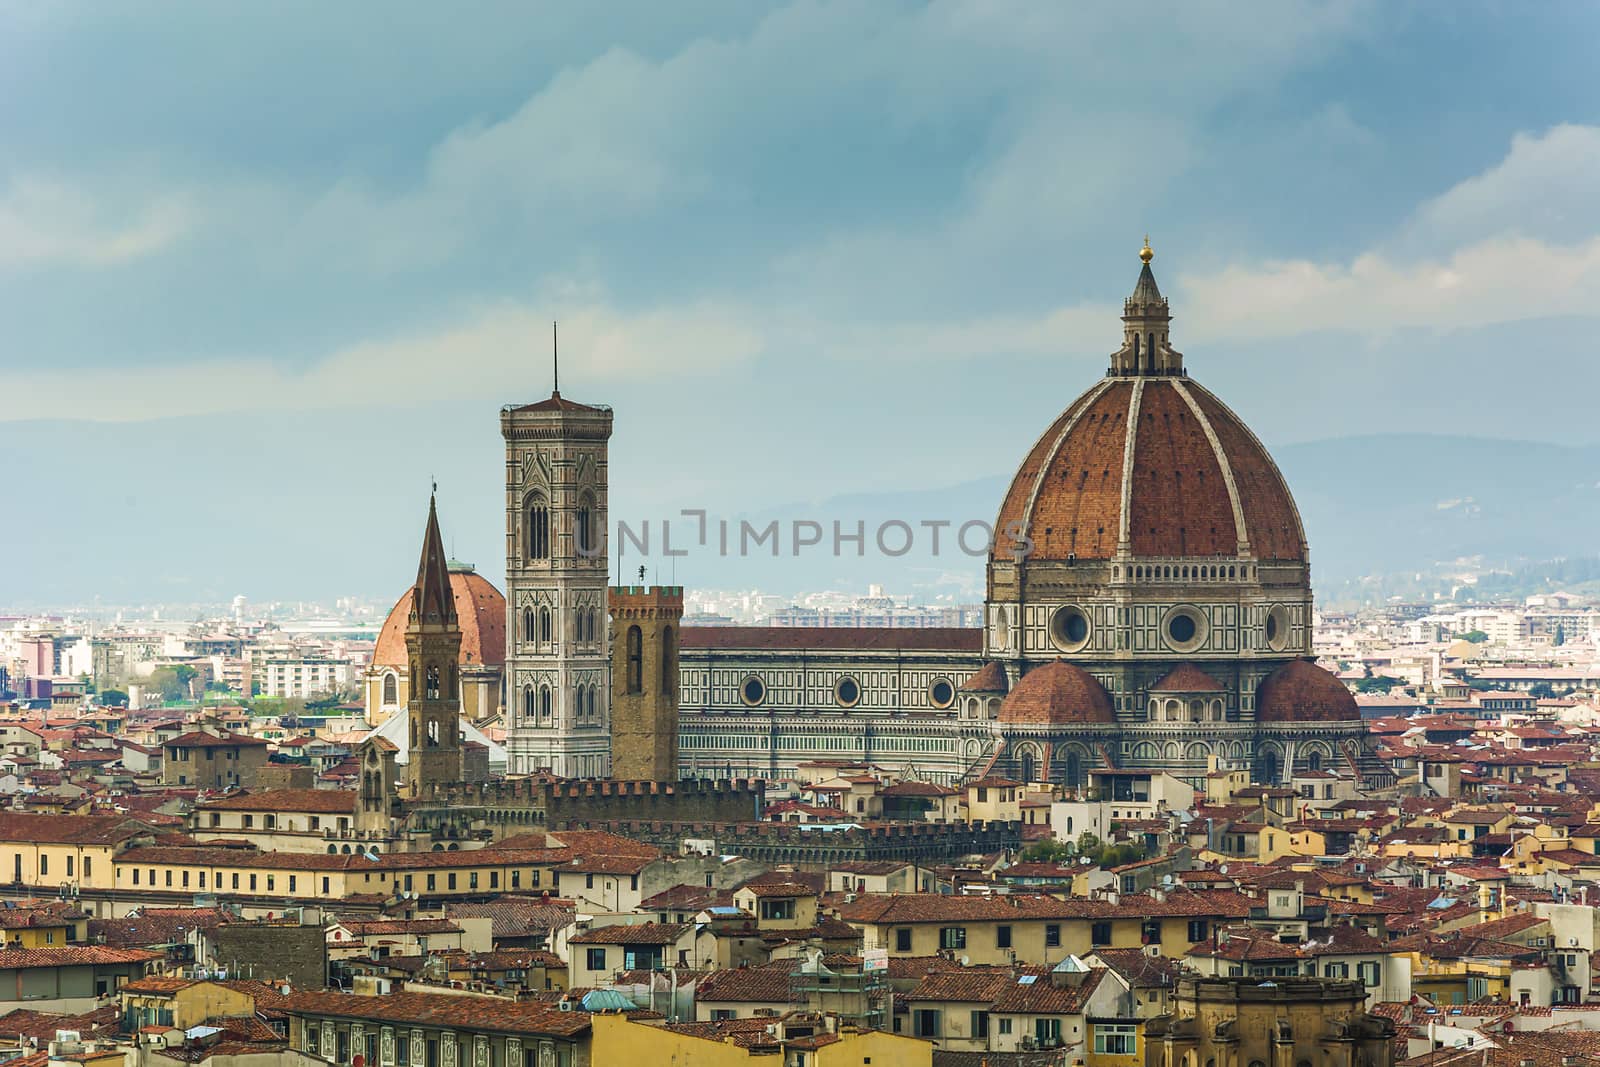 Florence Duomo and tower bell by rarrarorro